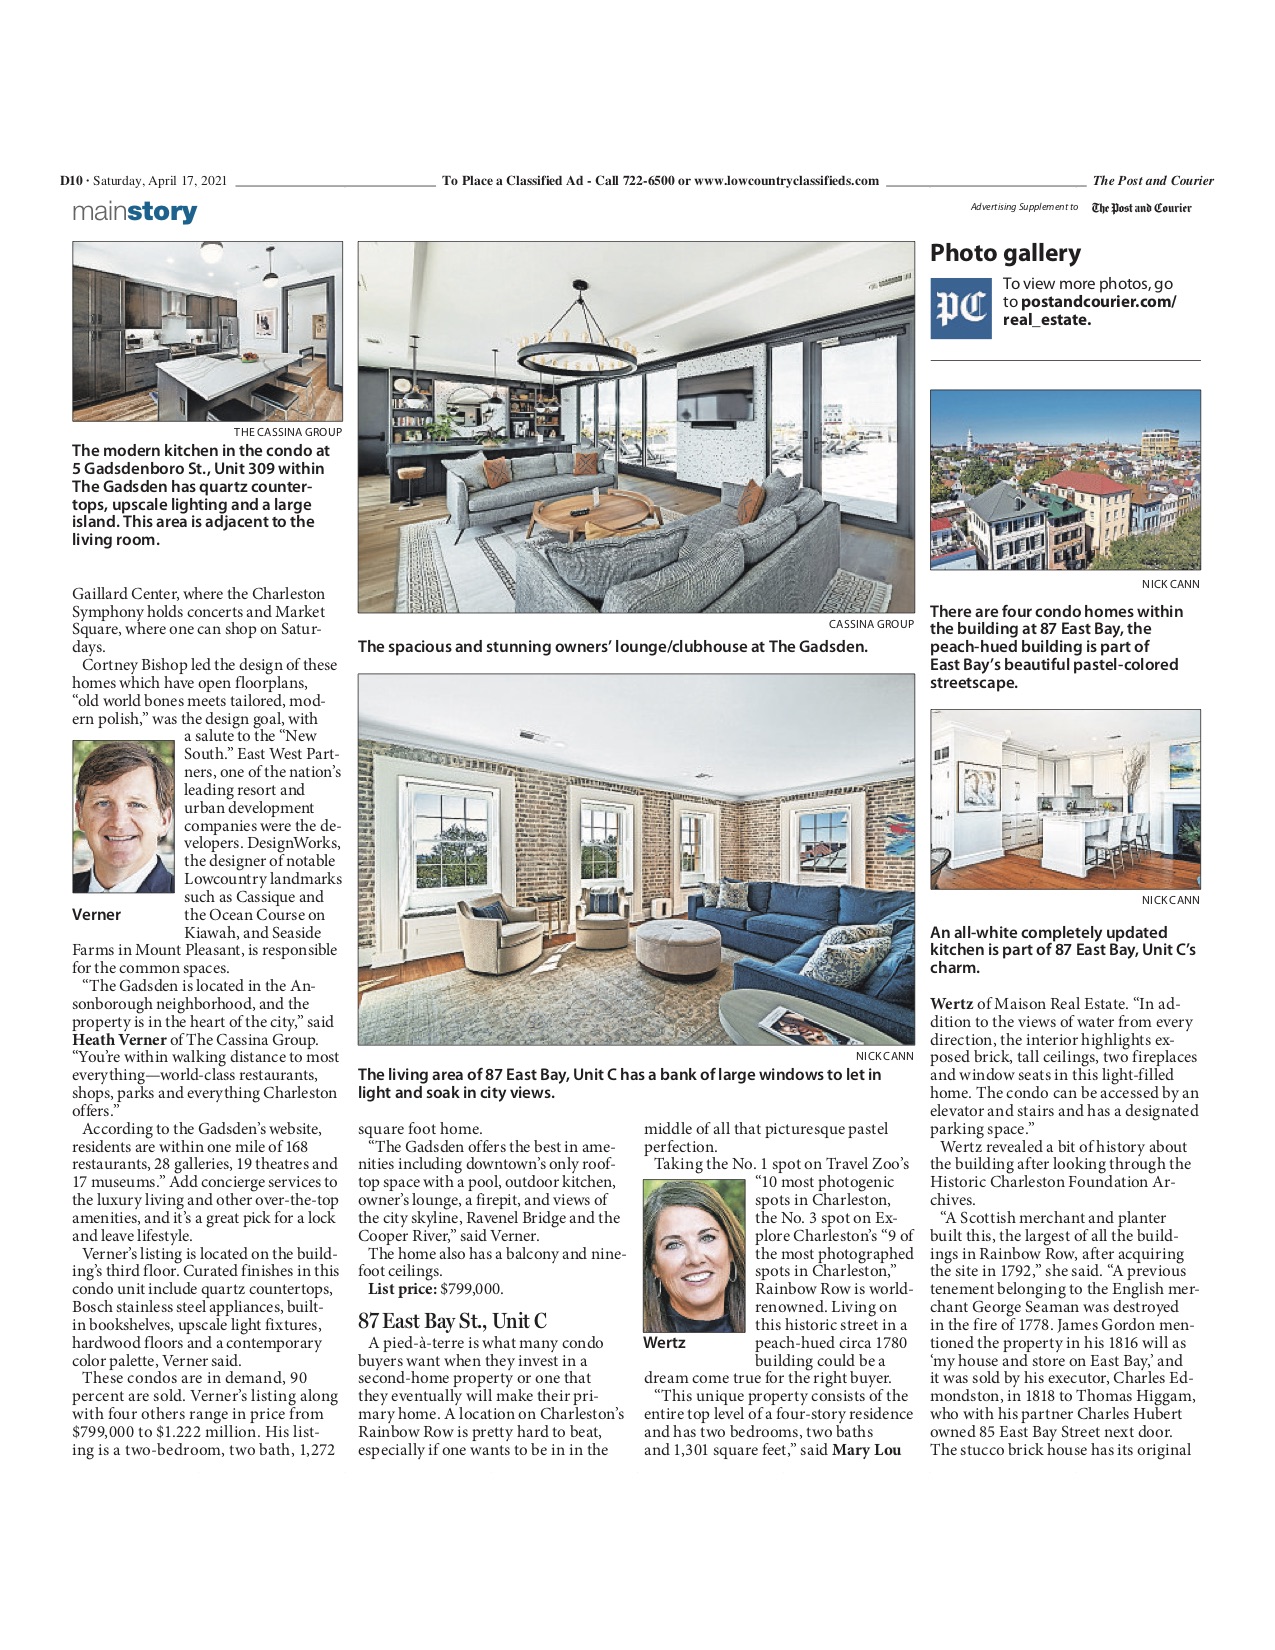 Post and Courier - Luxury Condos